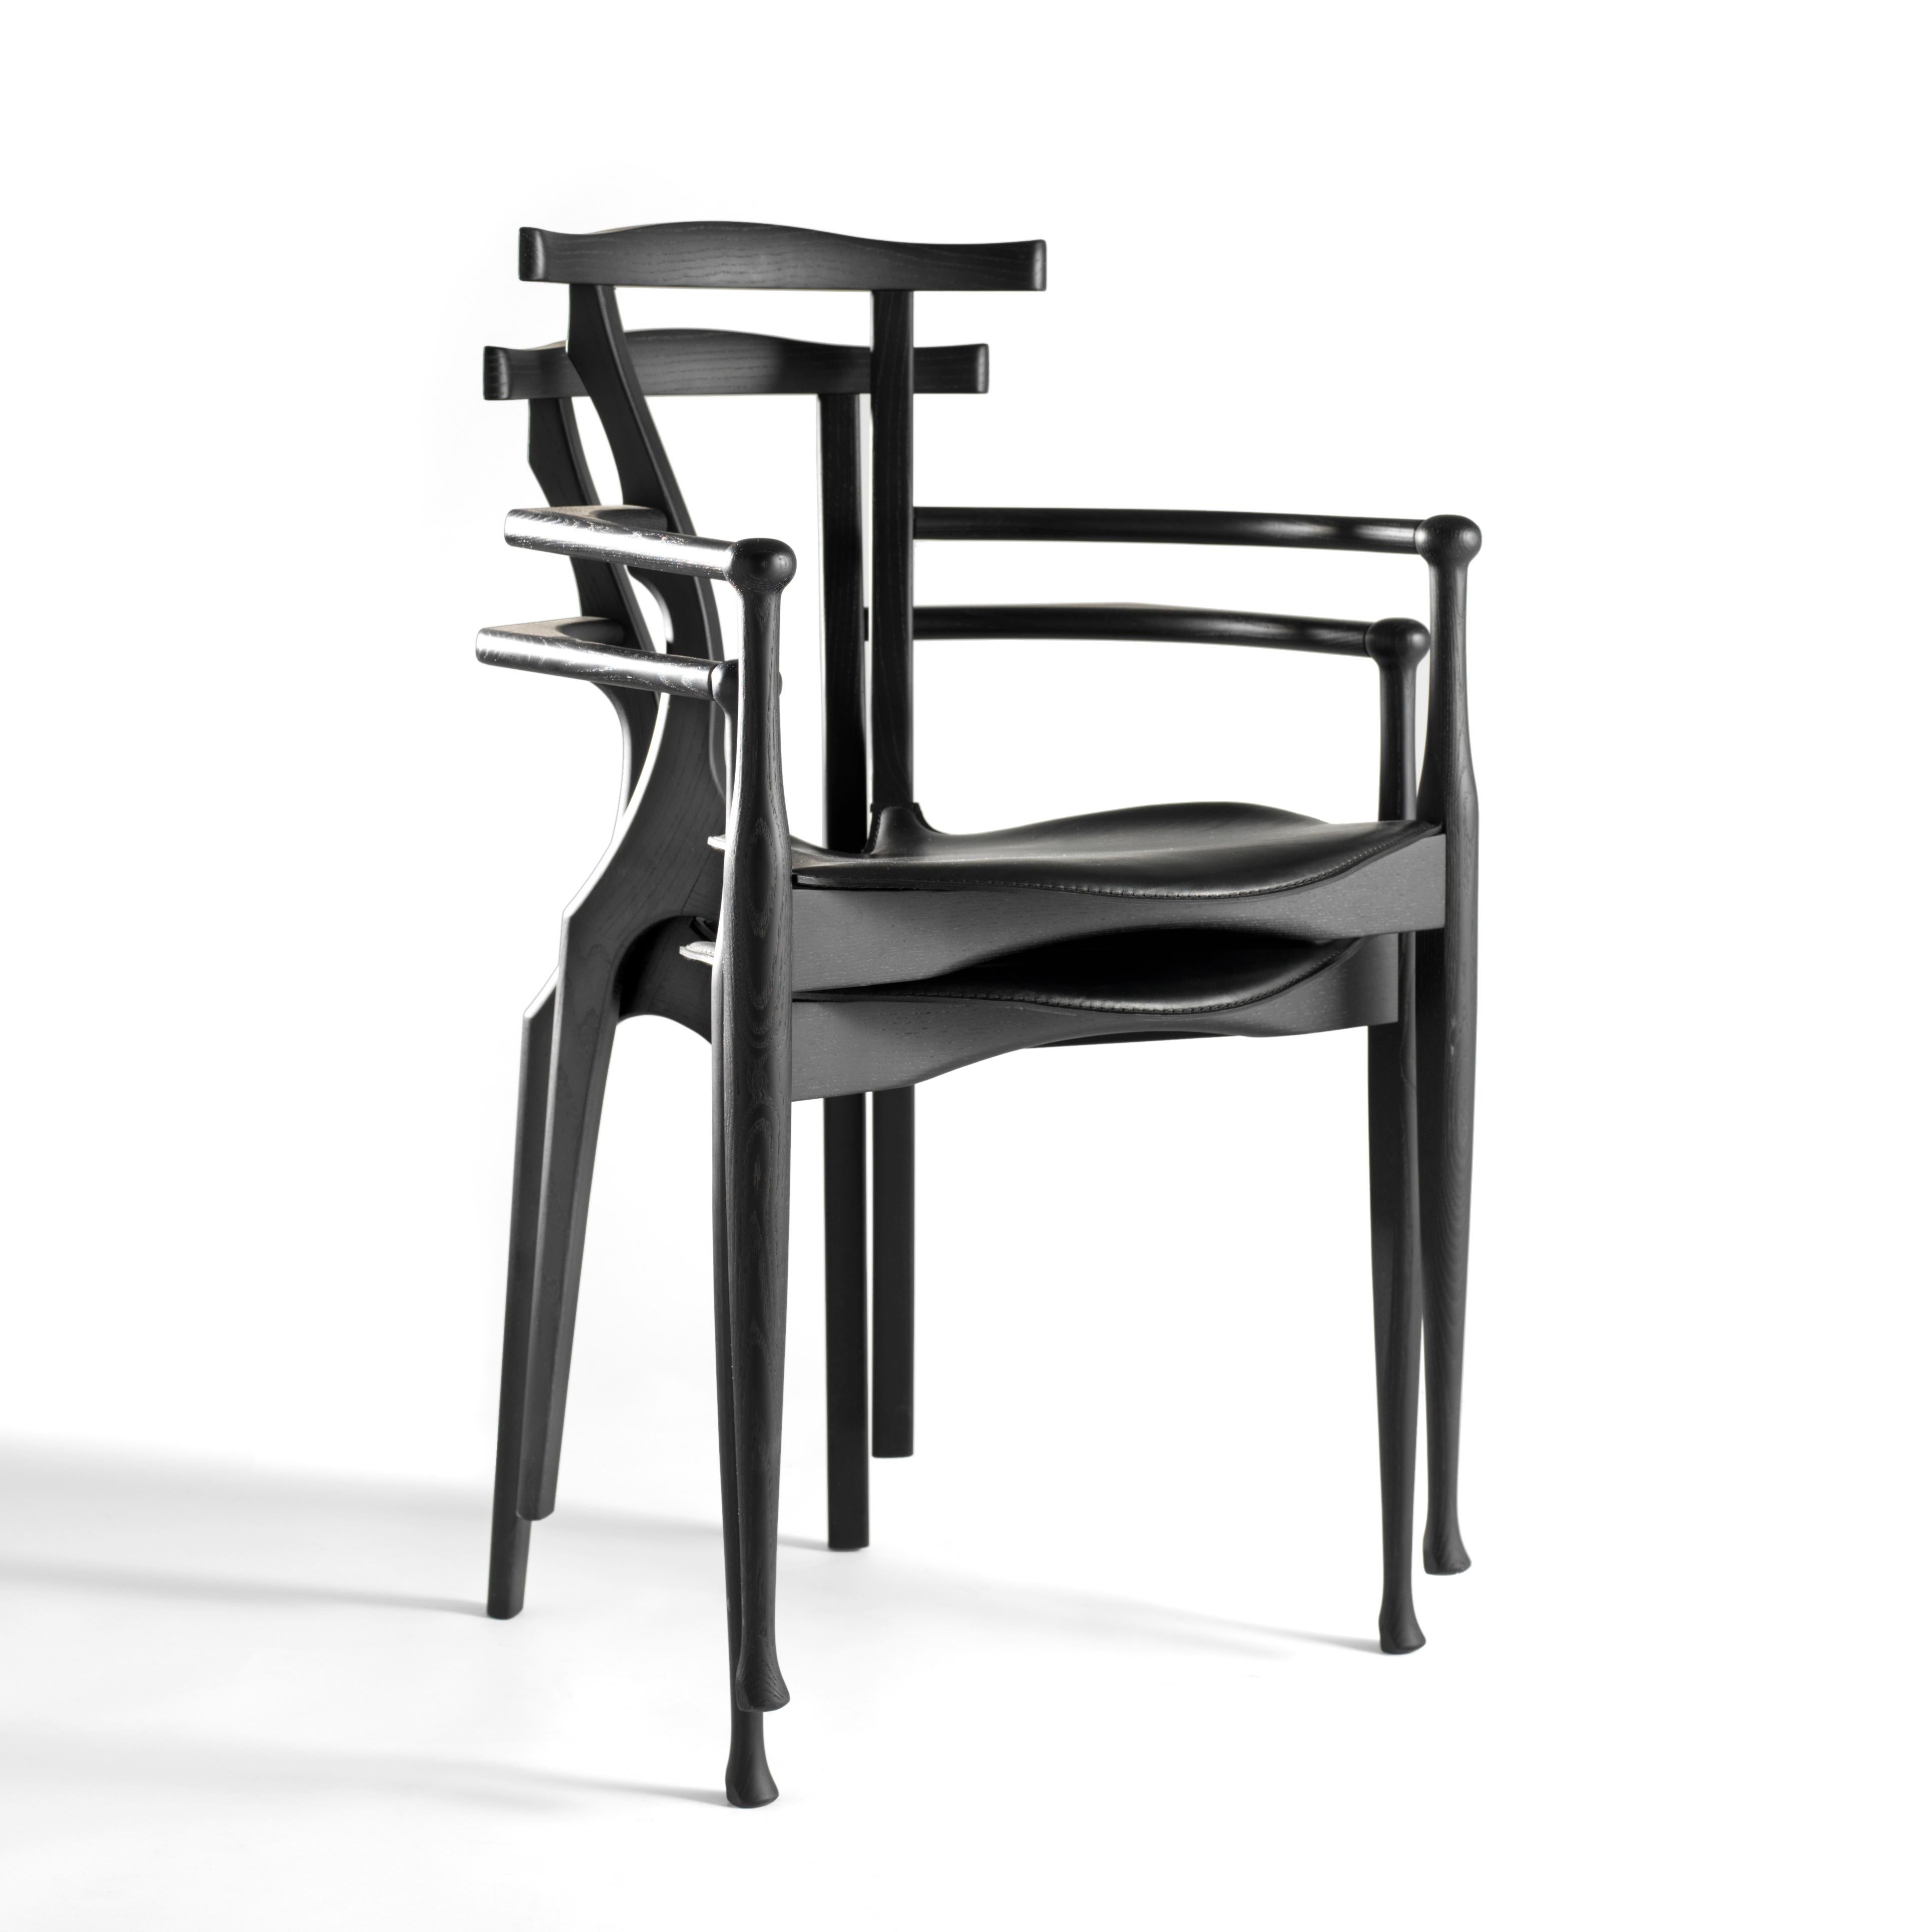 Set of 4 Black Gaulino Chair Oscar Tusquets In New Condition For Sale In Barcelona, Barcelona